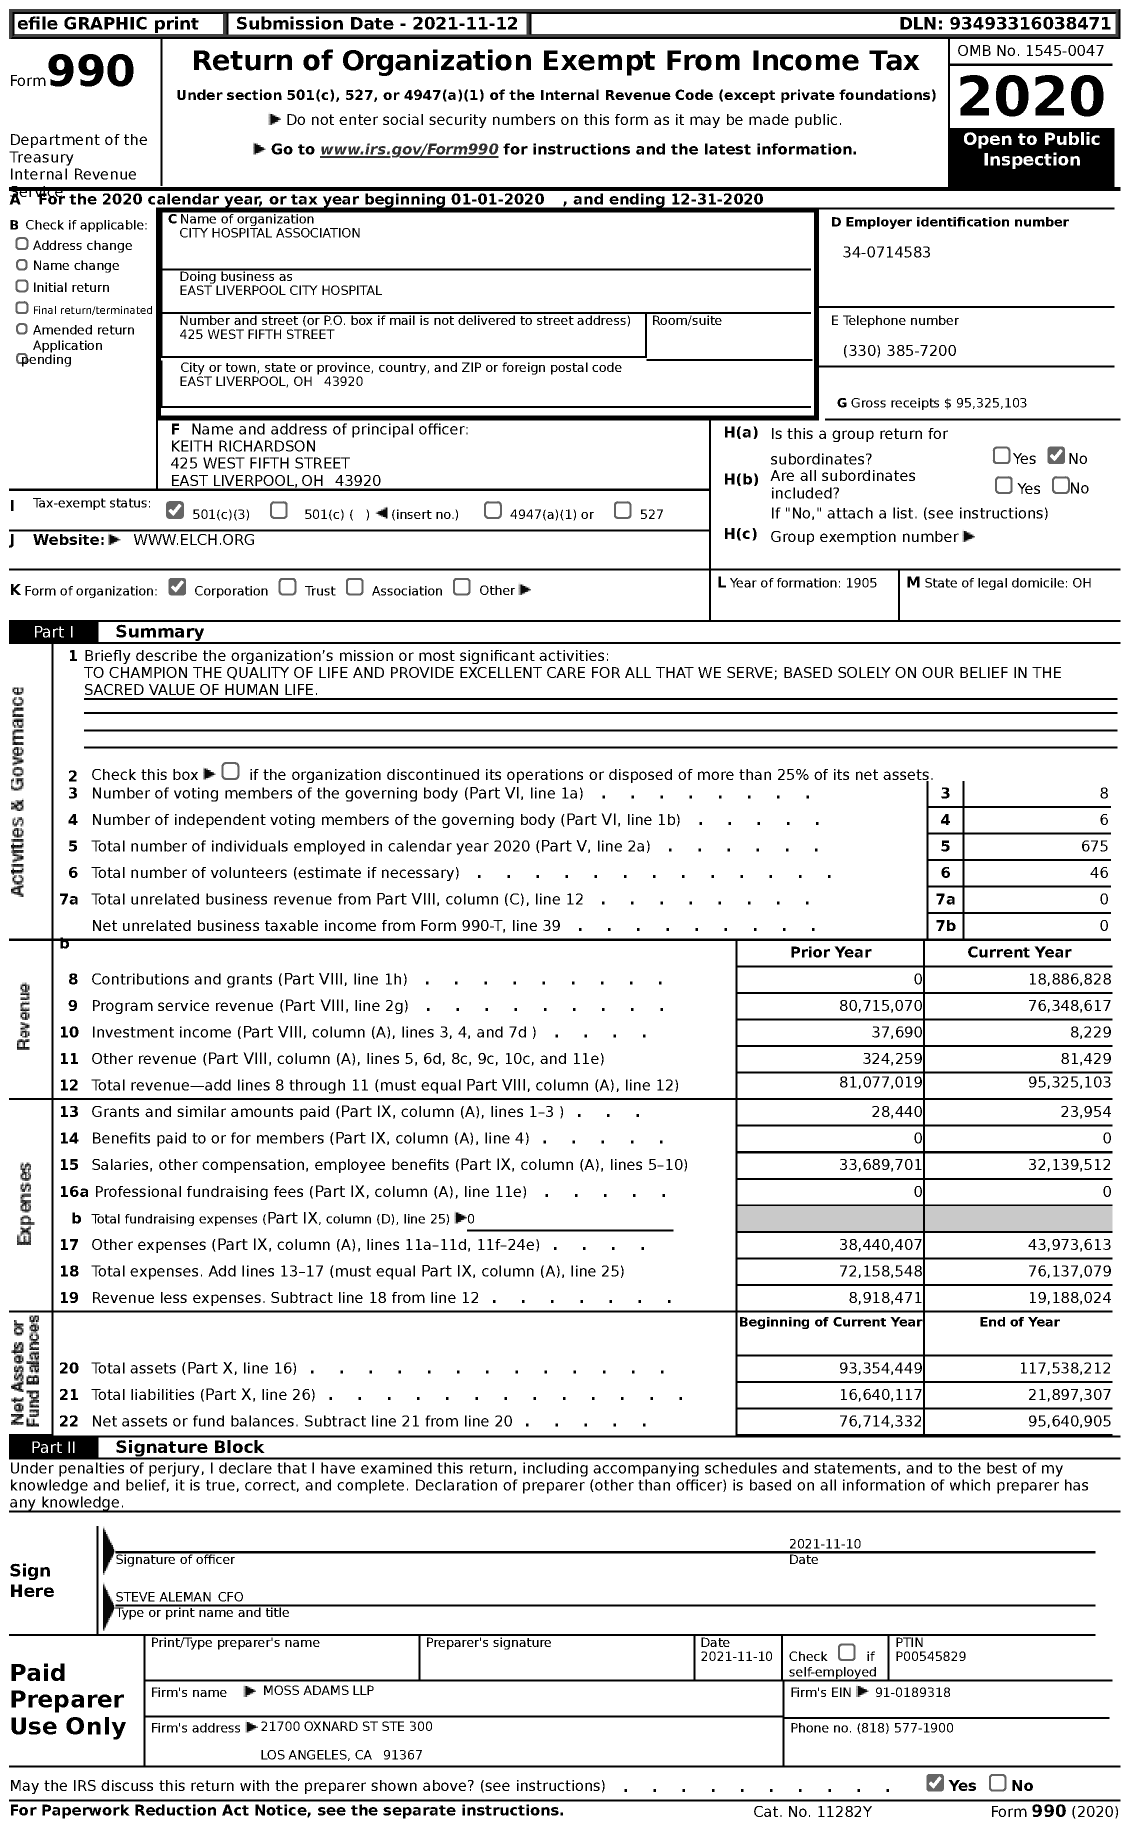 Image of first page of 2020 Form 990 for East Liverpool City Hospital (ELCH)